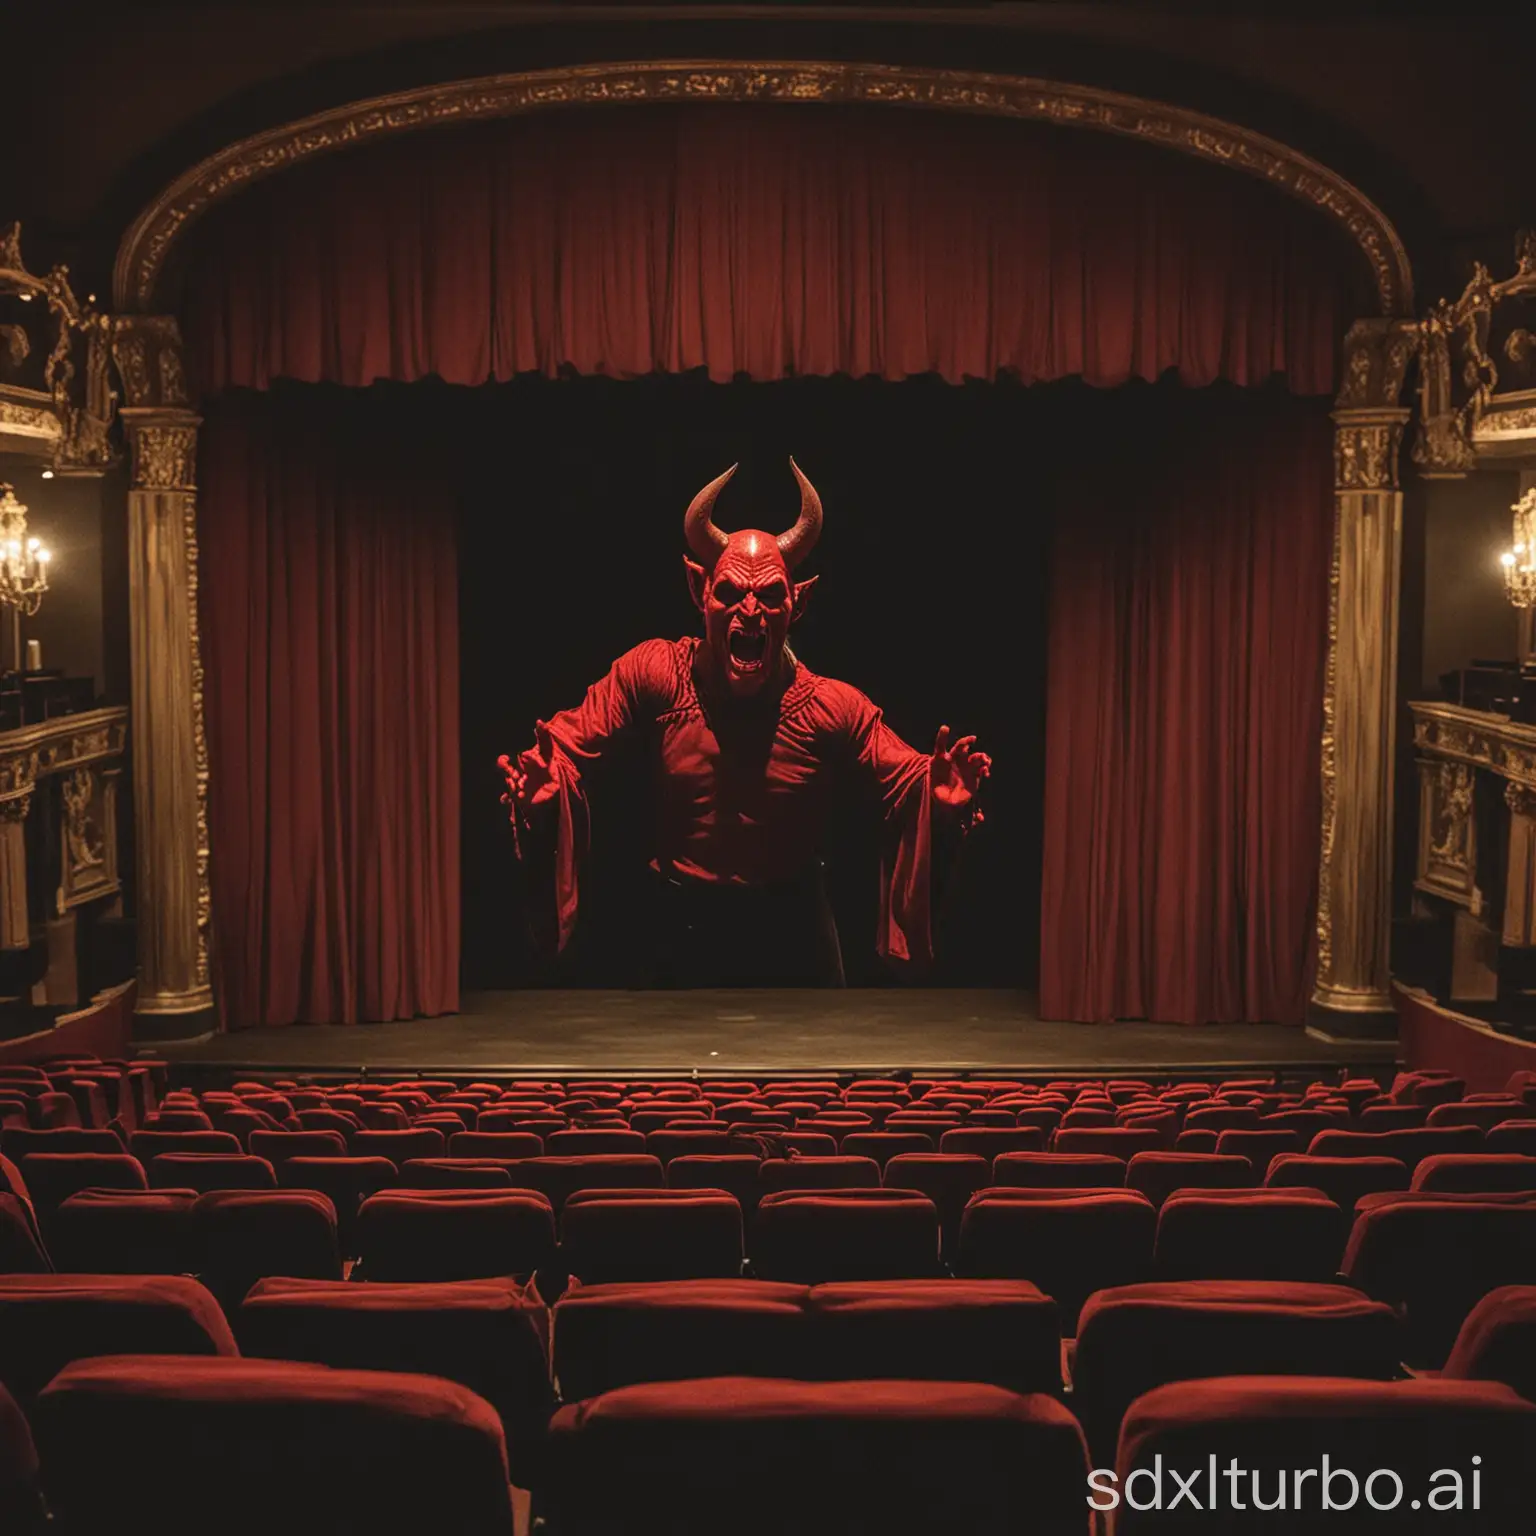 Sinister-Devil-Performing-in-a-Theatrical-Setting